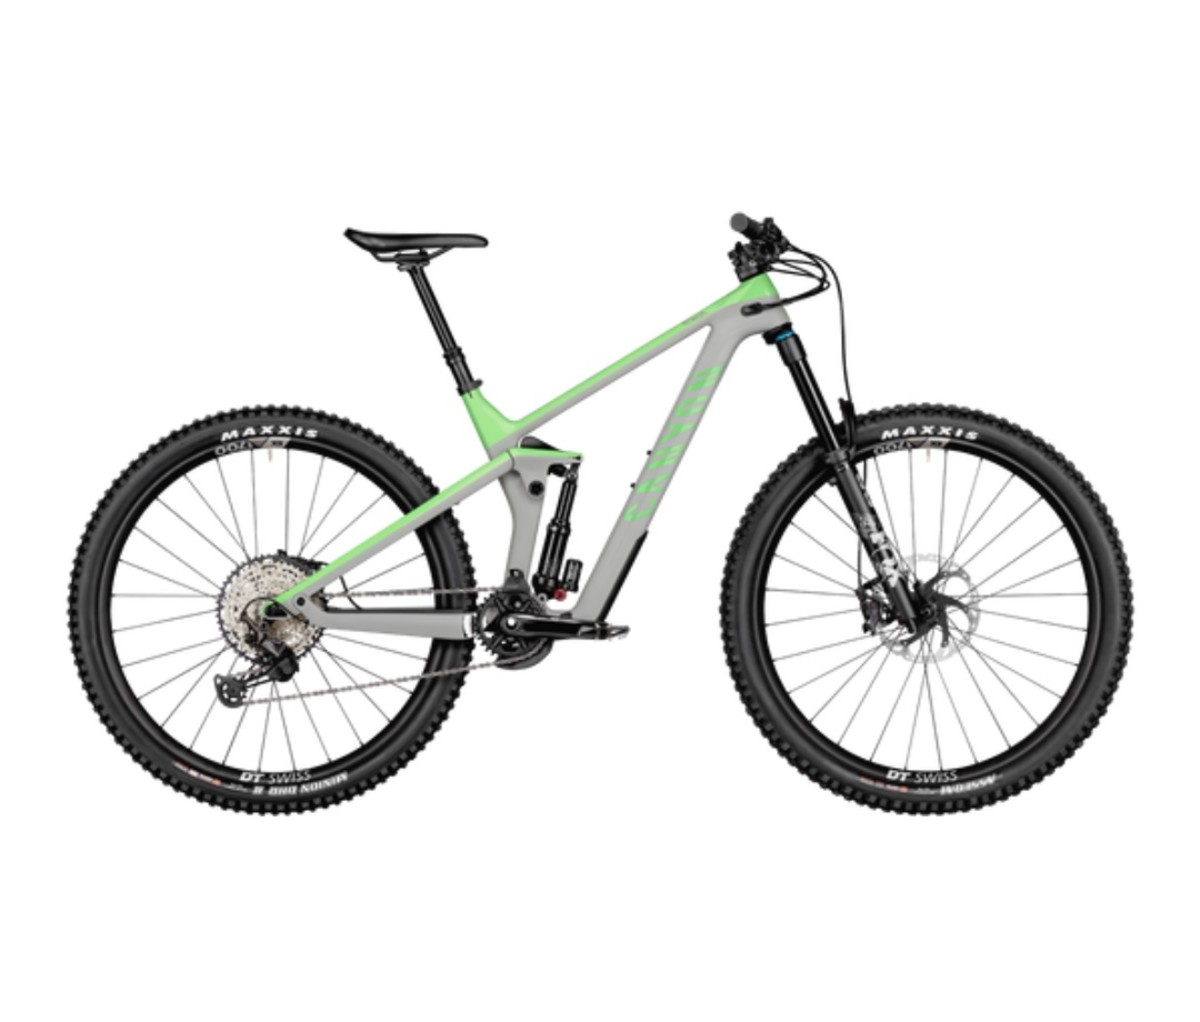 Large wheel, 29-inch mountain bikes are more refined and rideable than ever, check out these top picks.